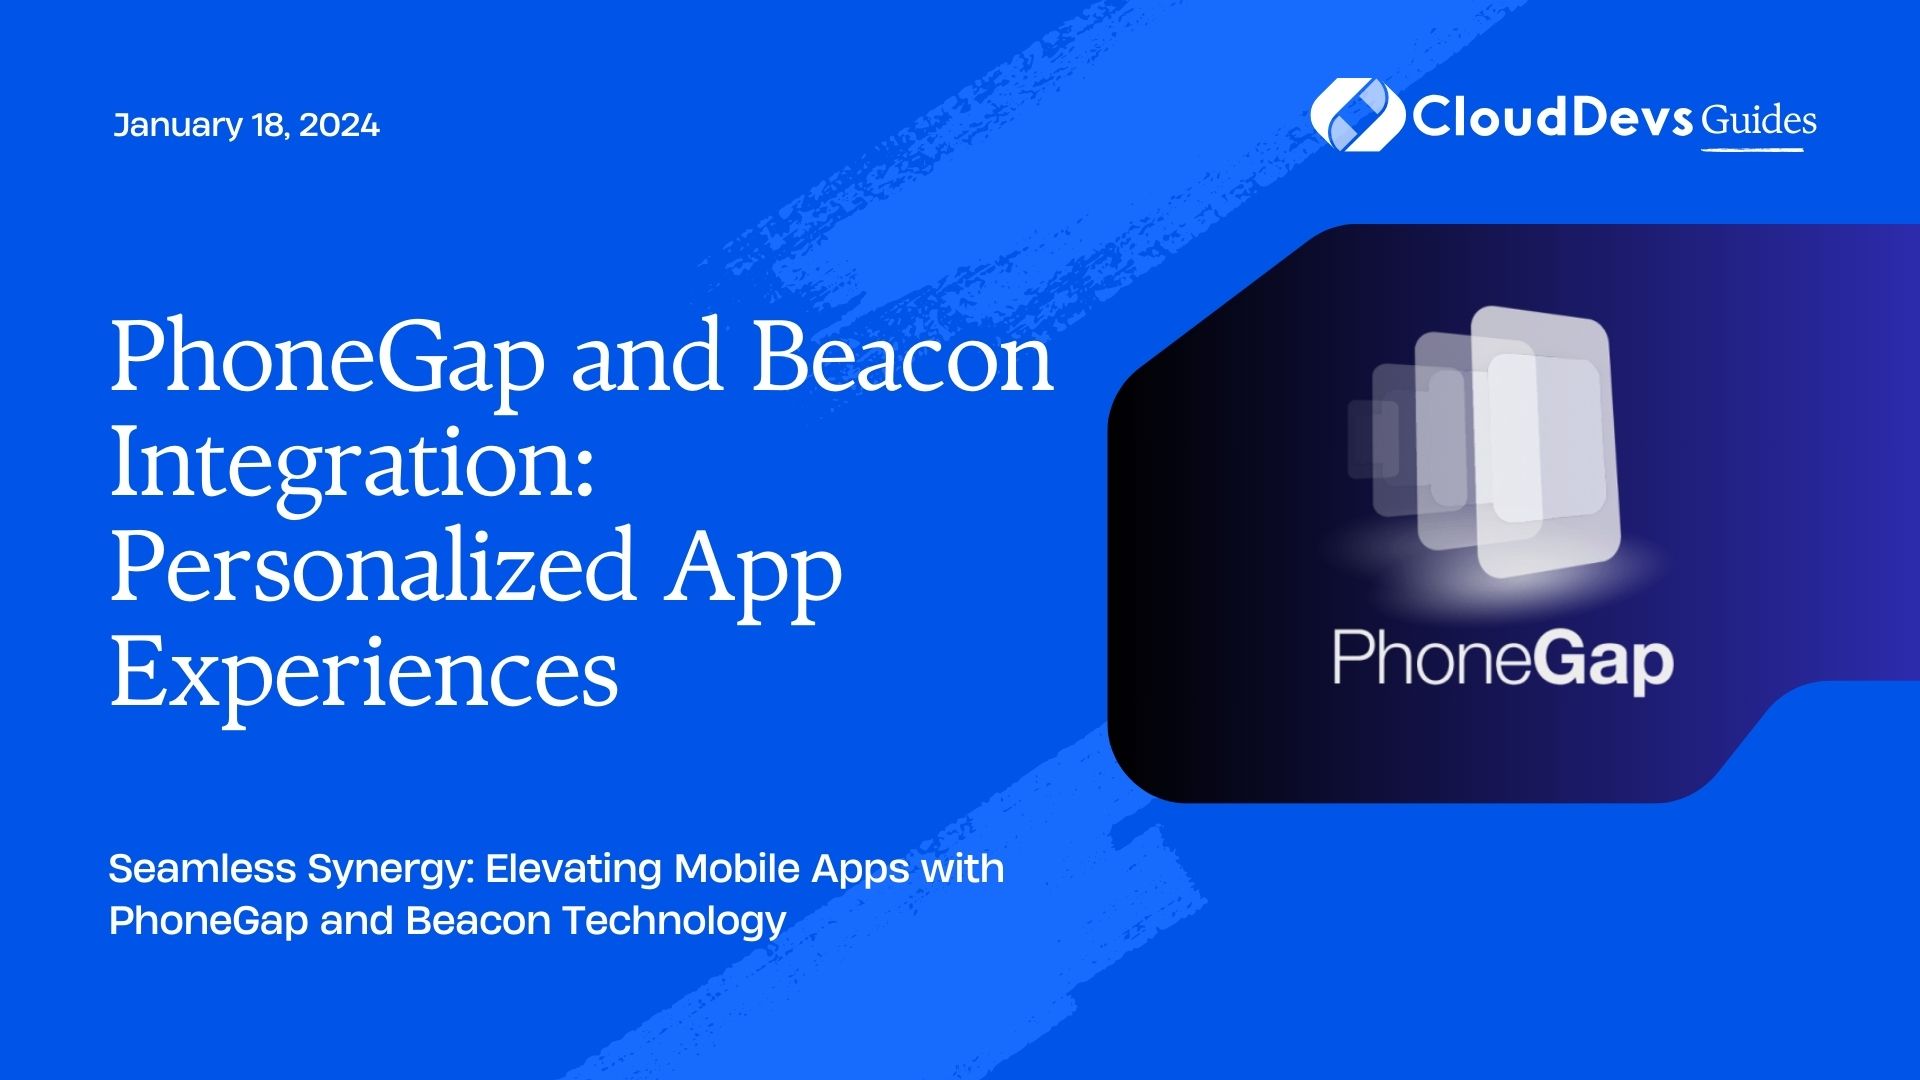 PhoneGap and Beacon Integration: Personalized App Experiences